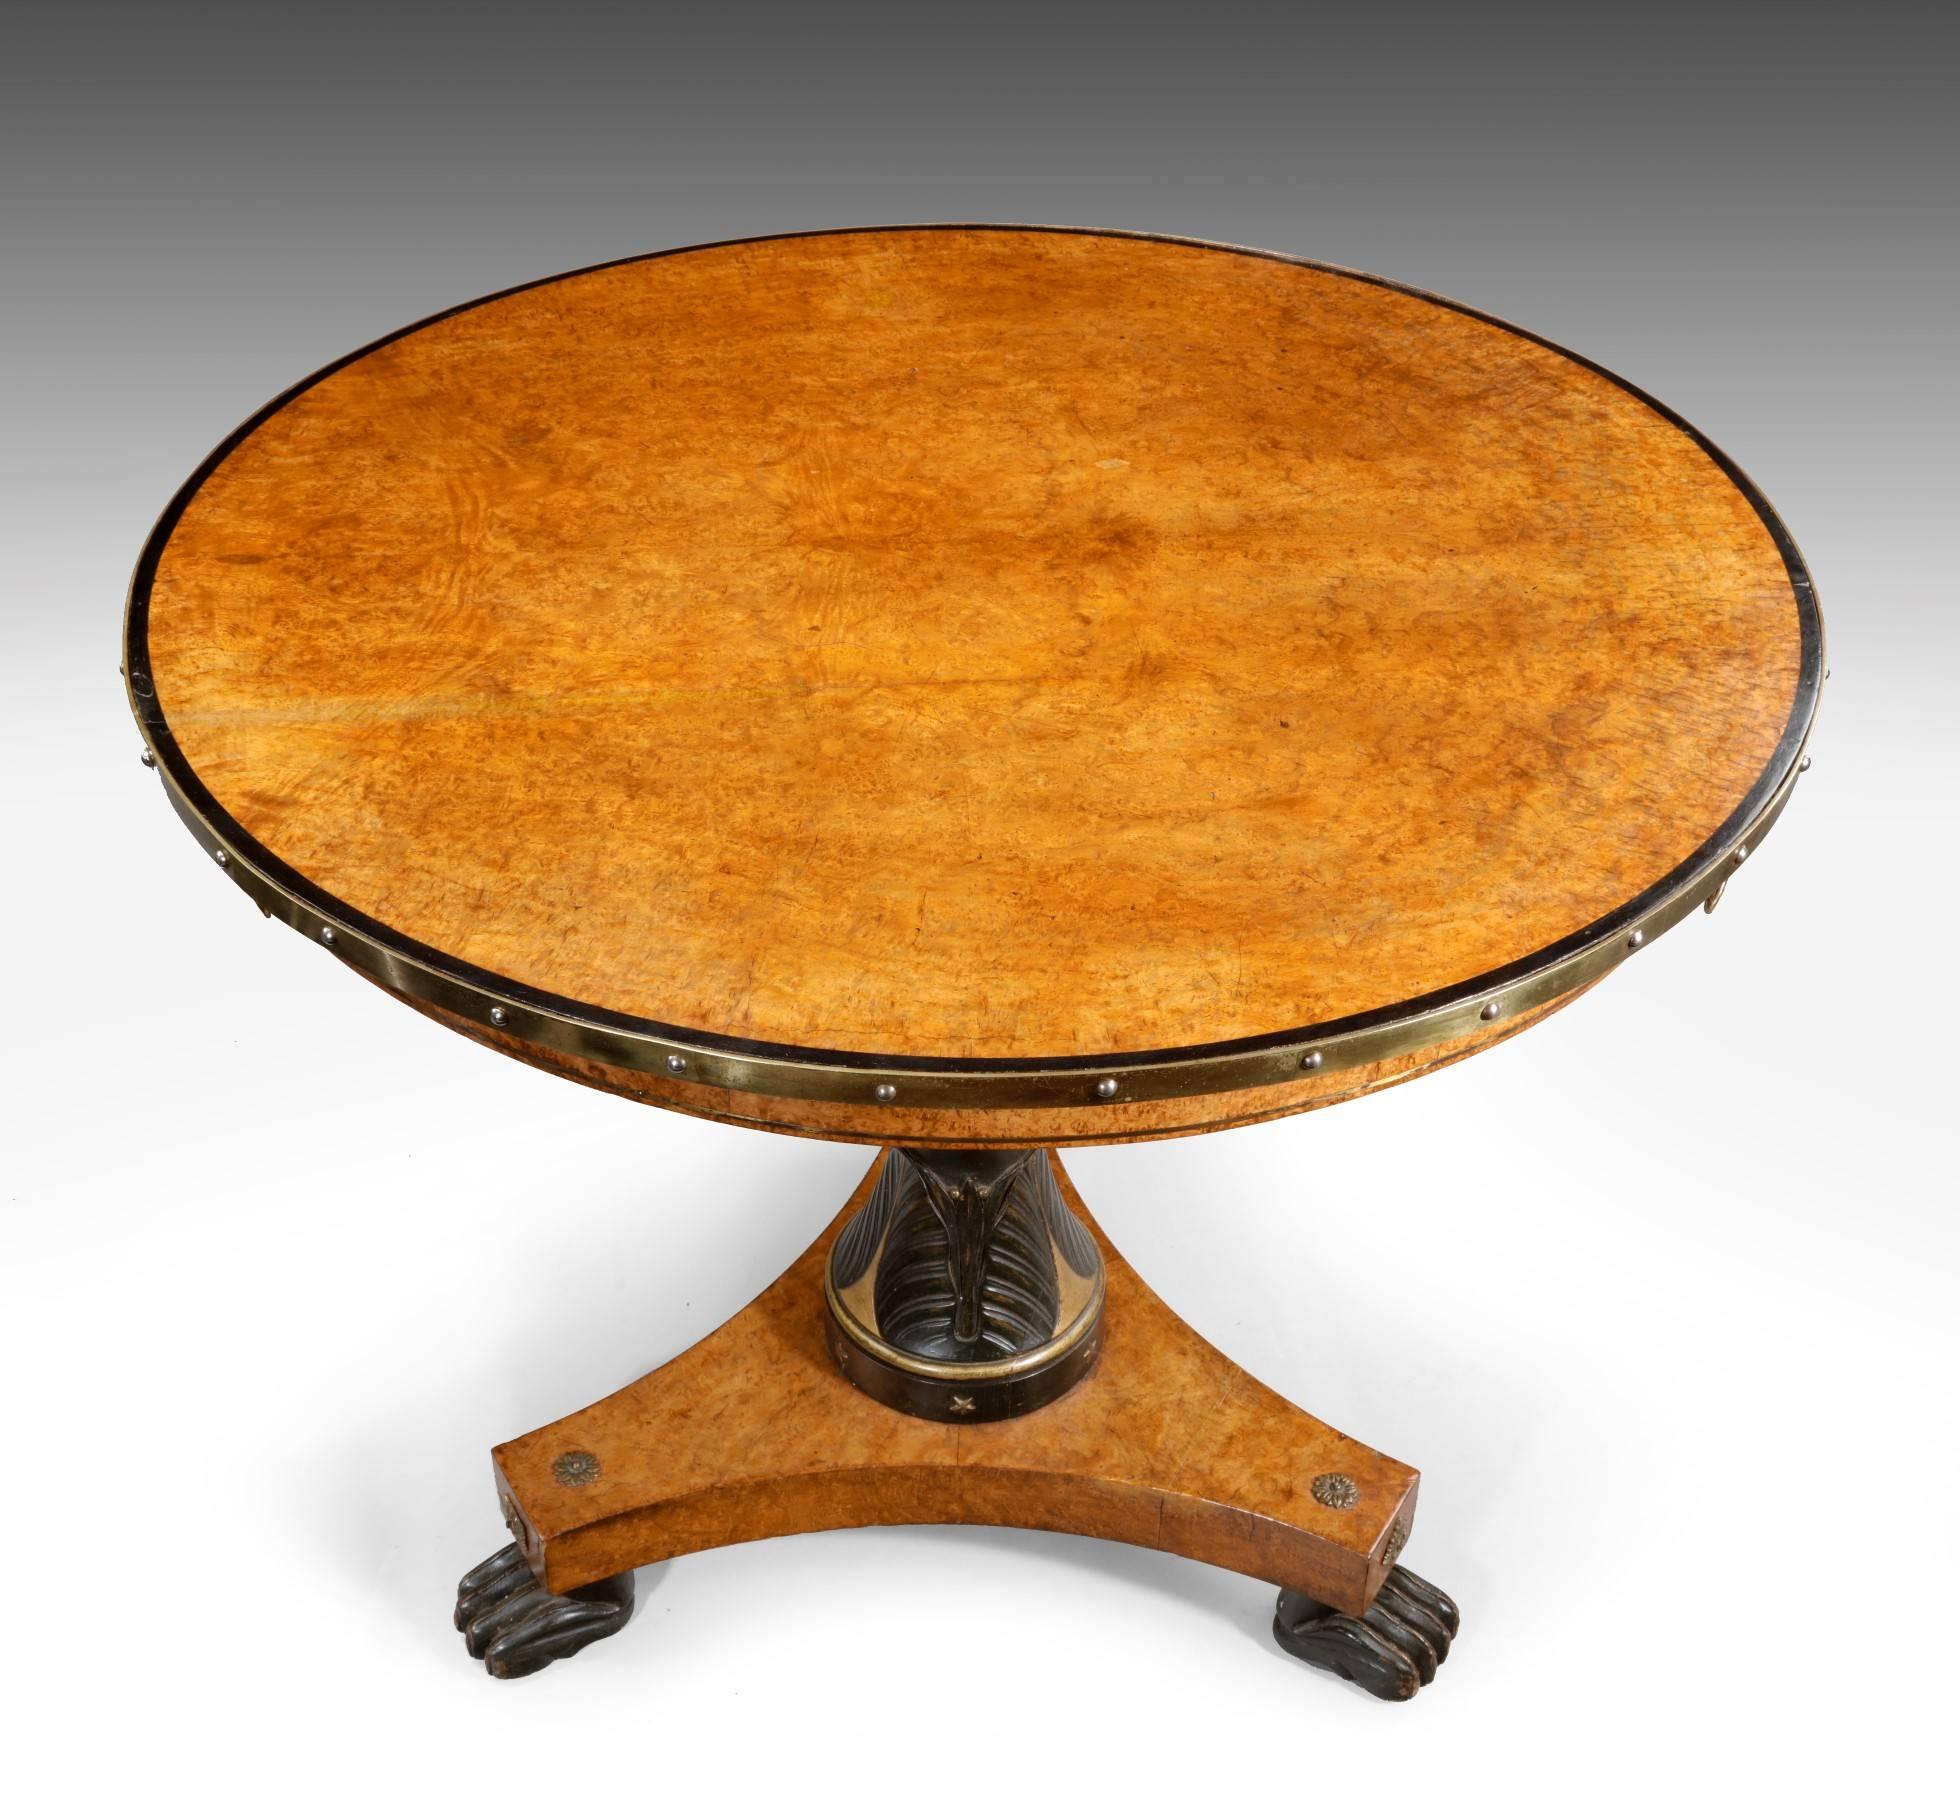 Of super quality, this burr amboyna table has a decorated column and applied brass lion ring masks to the top as well as a brass rim moulding. It is a really great colour and is ideal for use as a centre table or an occasional table. From its style